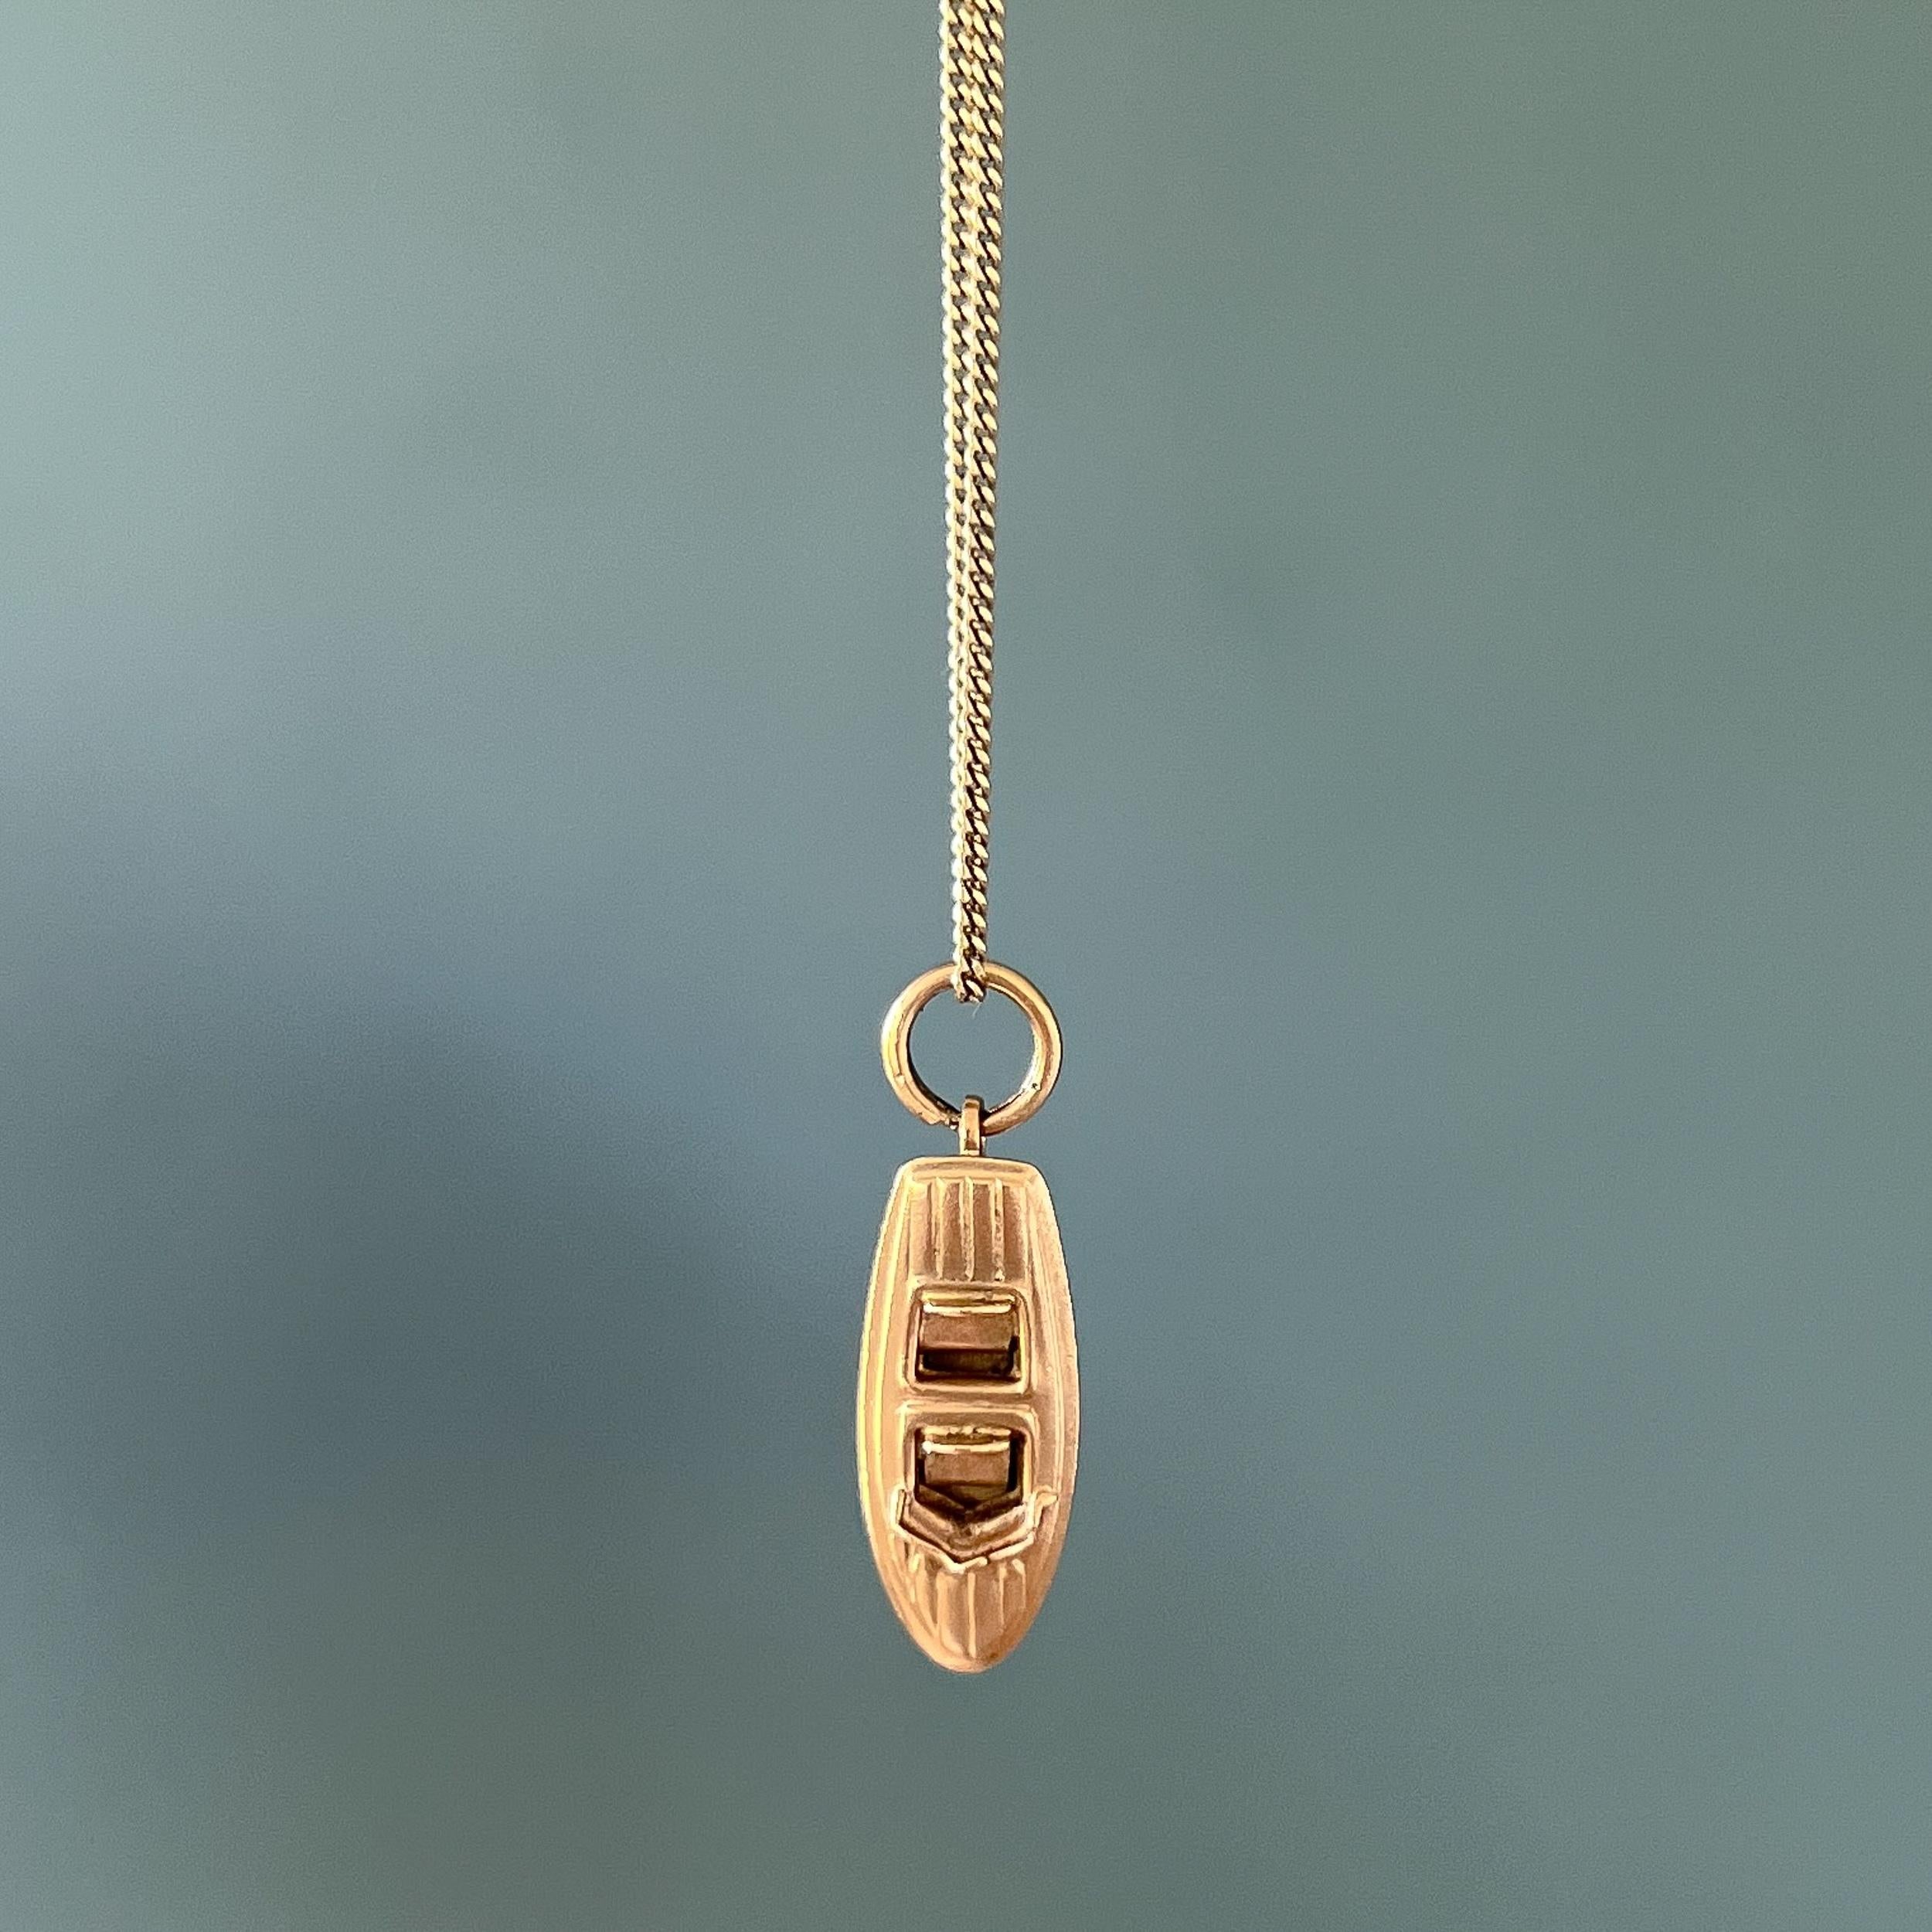 A vintage 18 karat yellow gold Italian speedboat charm pendant. This vintage 1960s streamlined speedboat has some very great details. The top of the motorboat has a pattern that resembles a wooden deck and the boat is equipped with a driver's seat